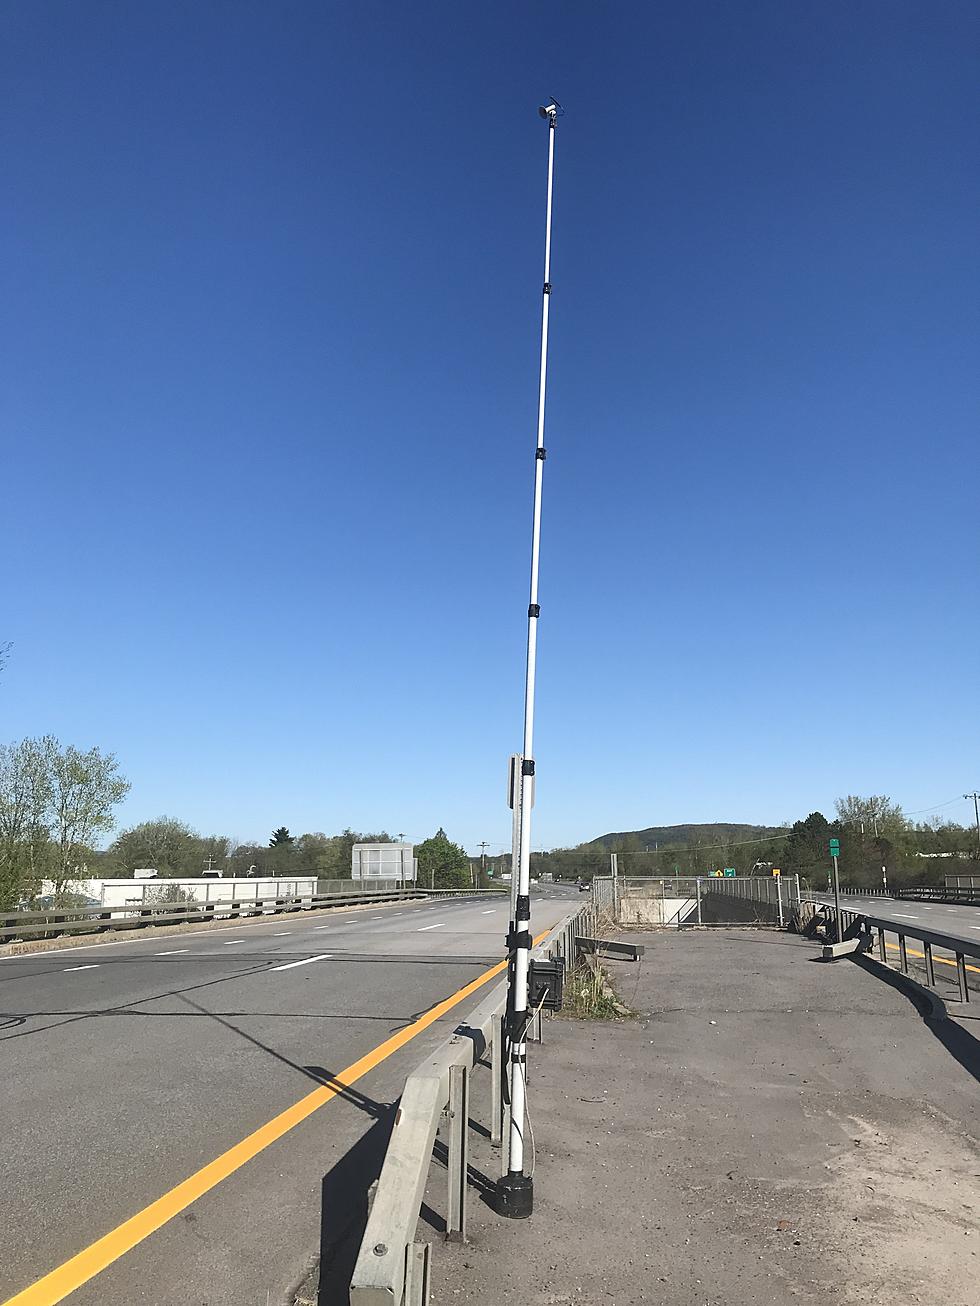 What Are Those Long Strange Antenna Devices On State Route 8?